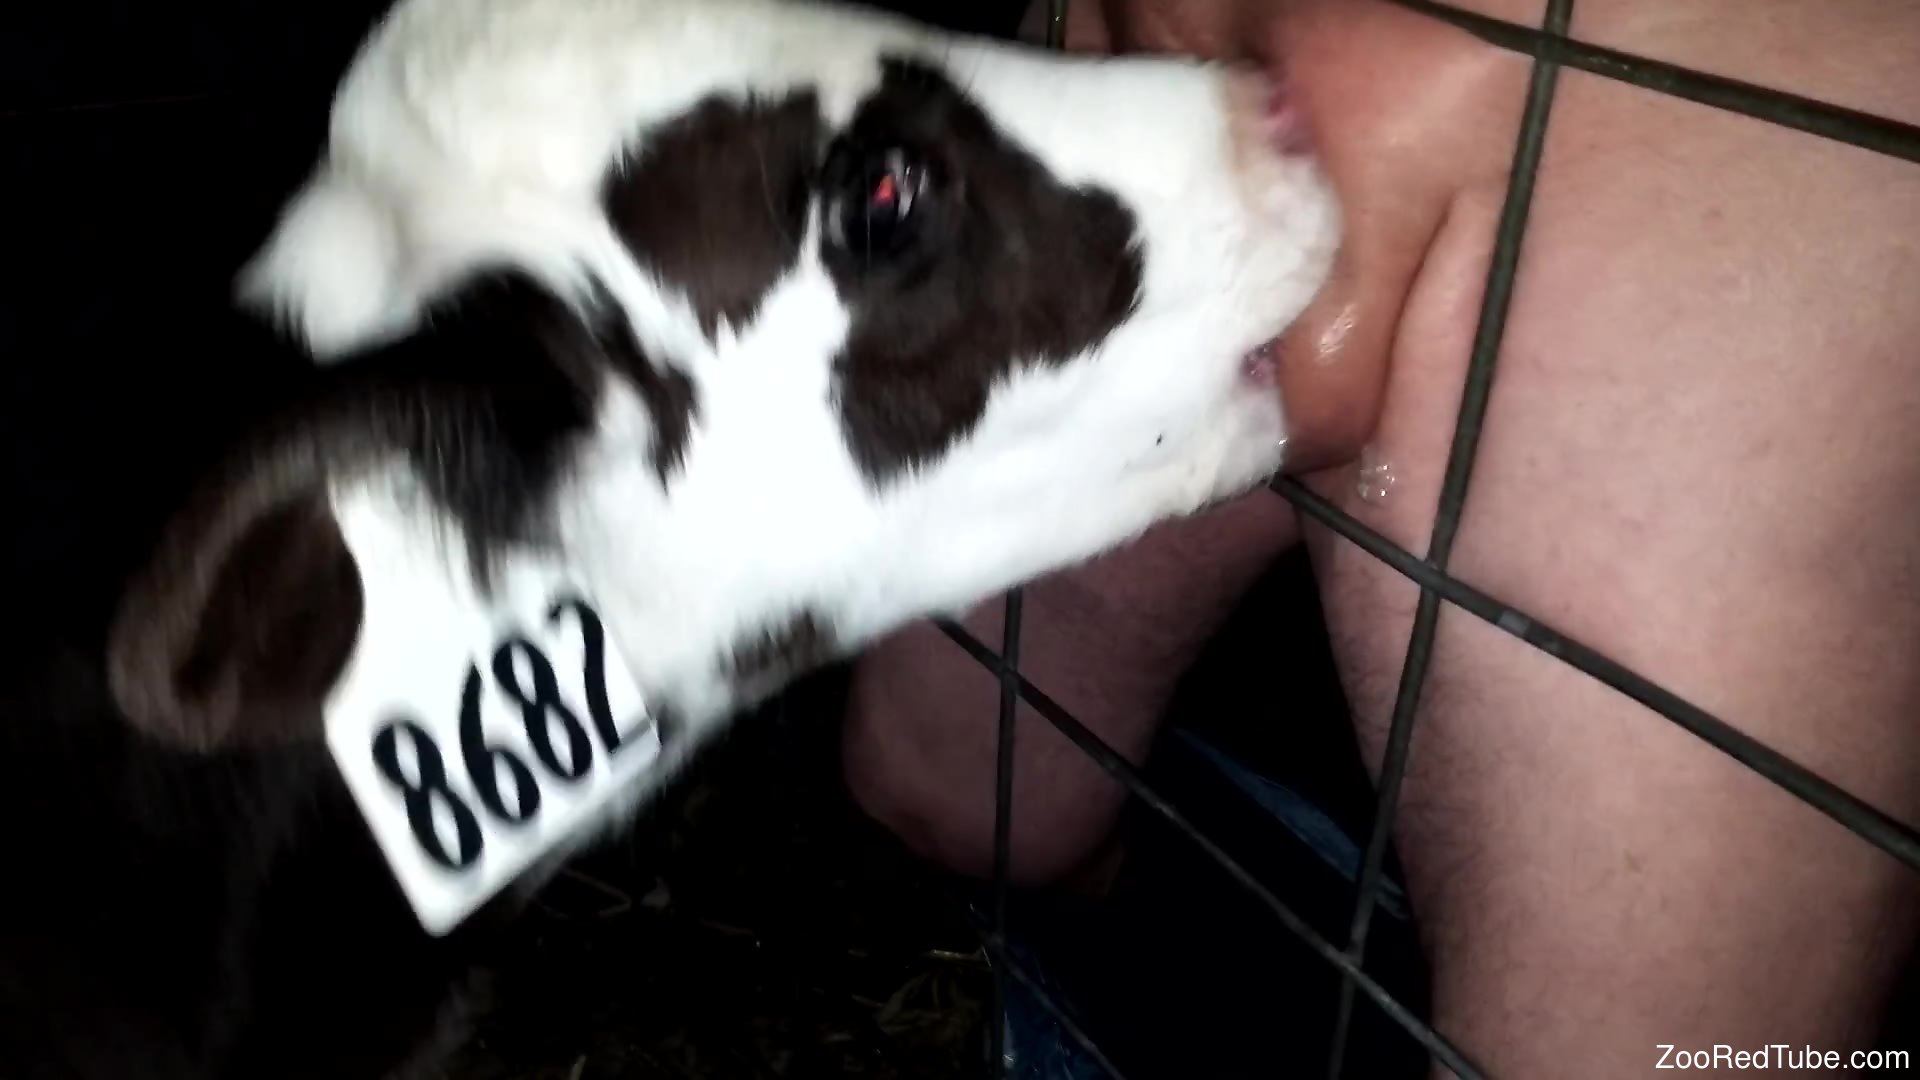 Www Xcxx Cow - Man sticks his dick through the fence for this baby cow